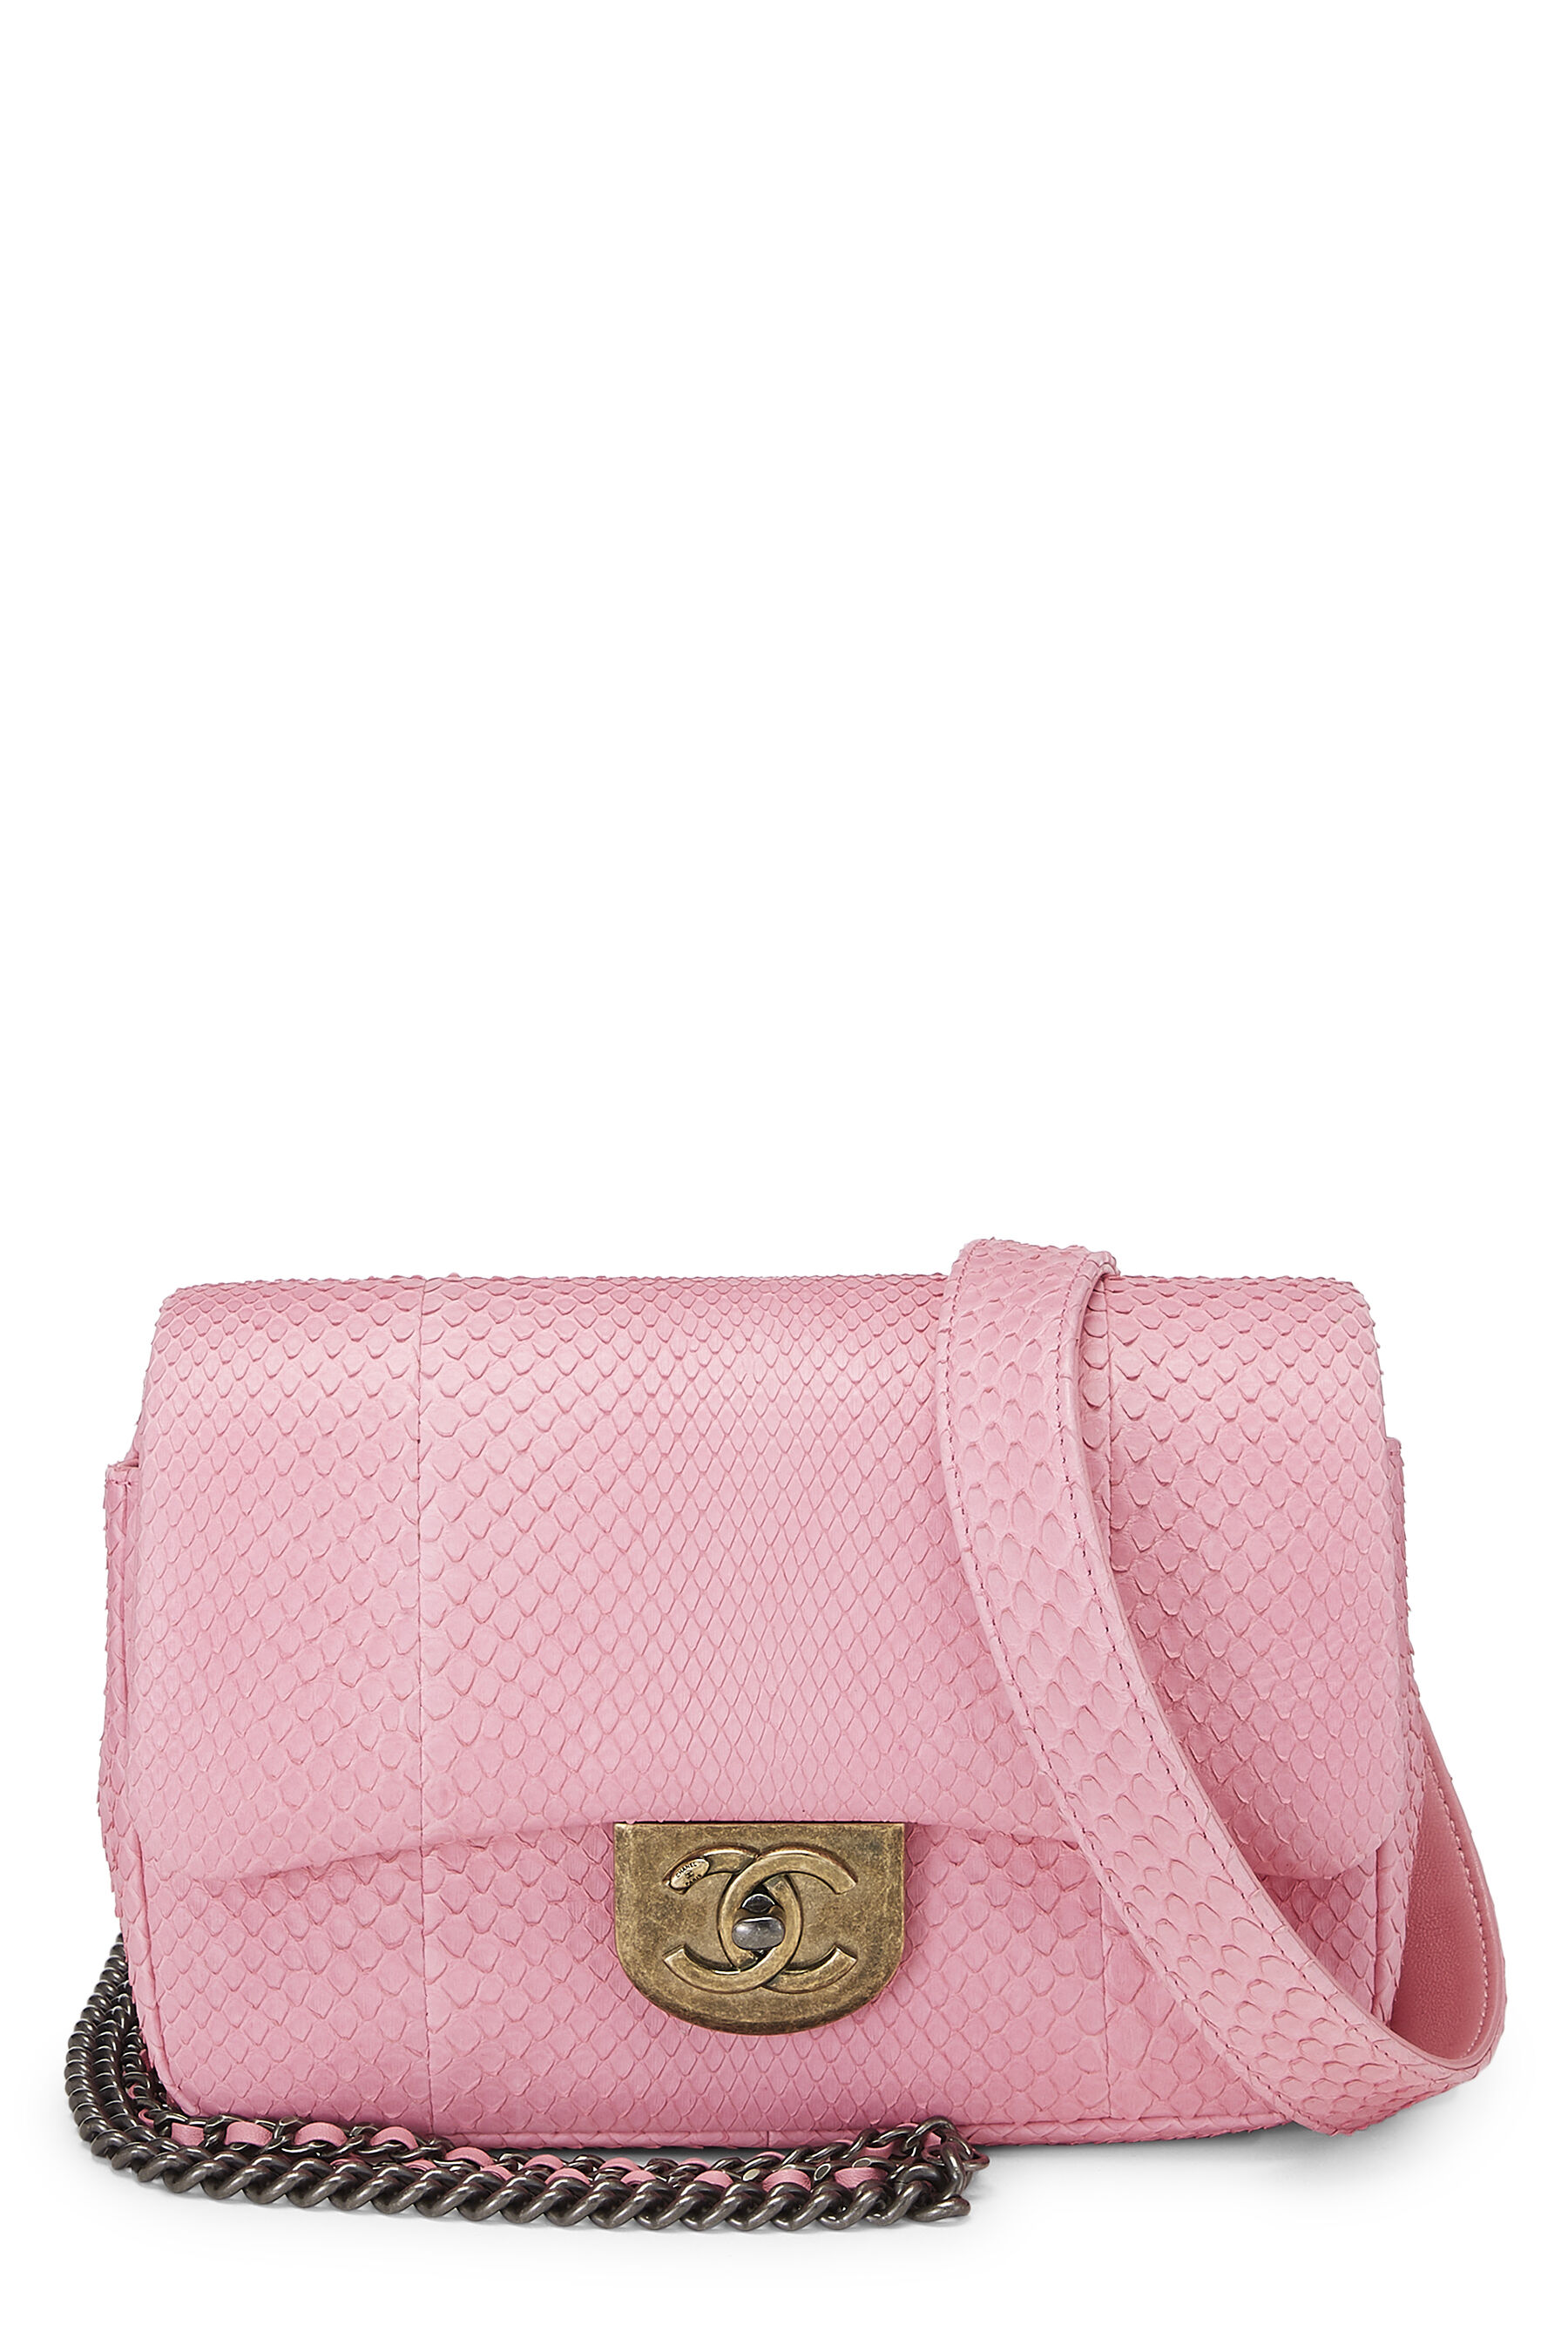 Pre-owned Chanel Pink Python Double Carry Waist Chain Flap Bag Small